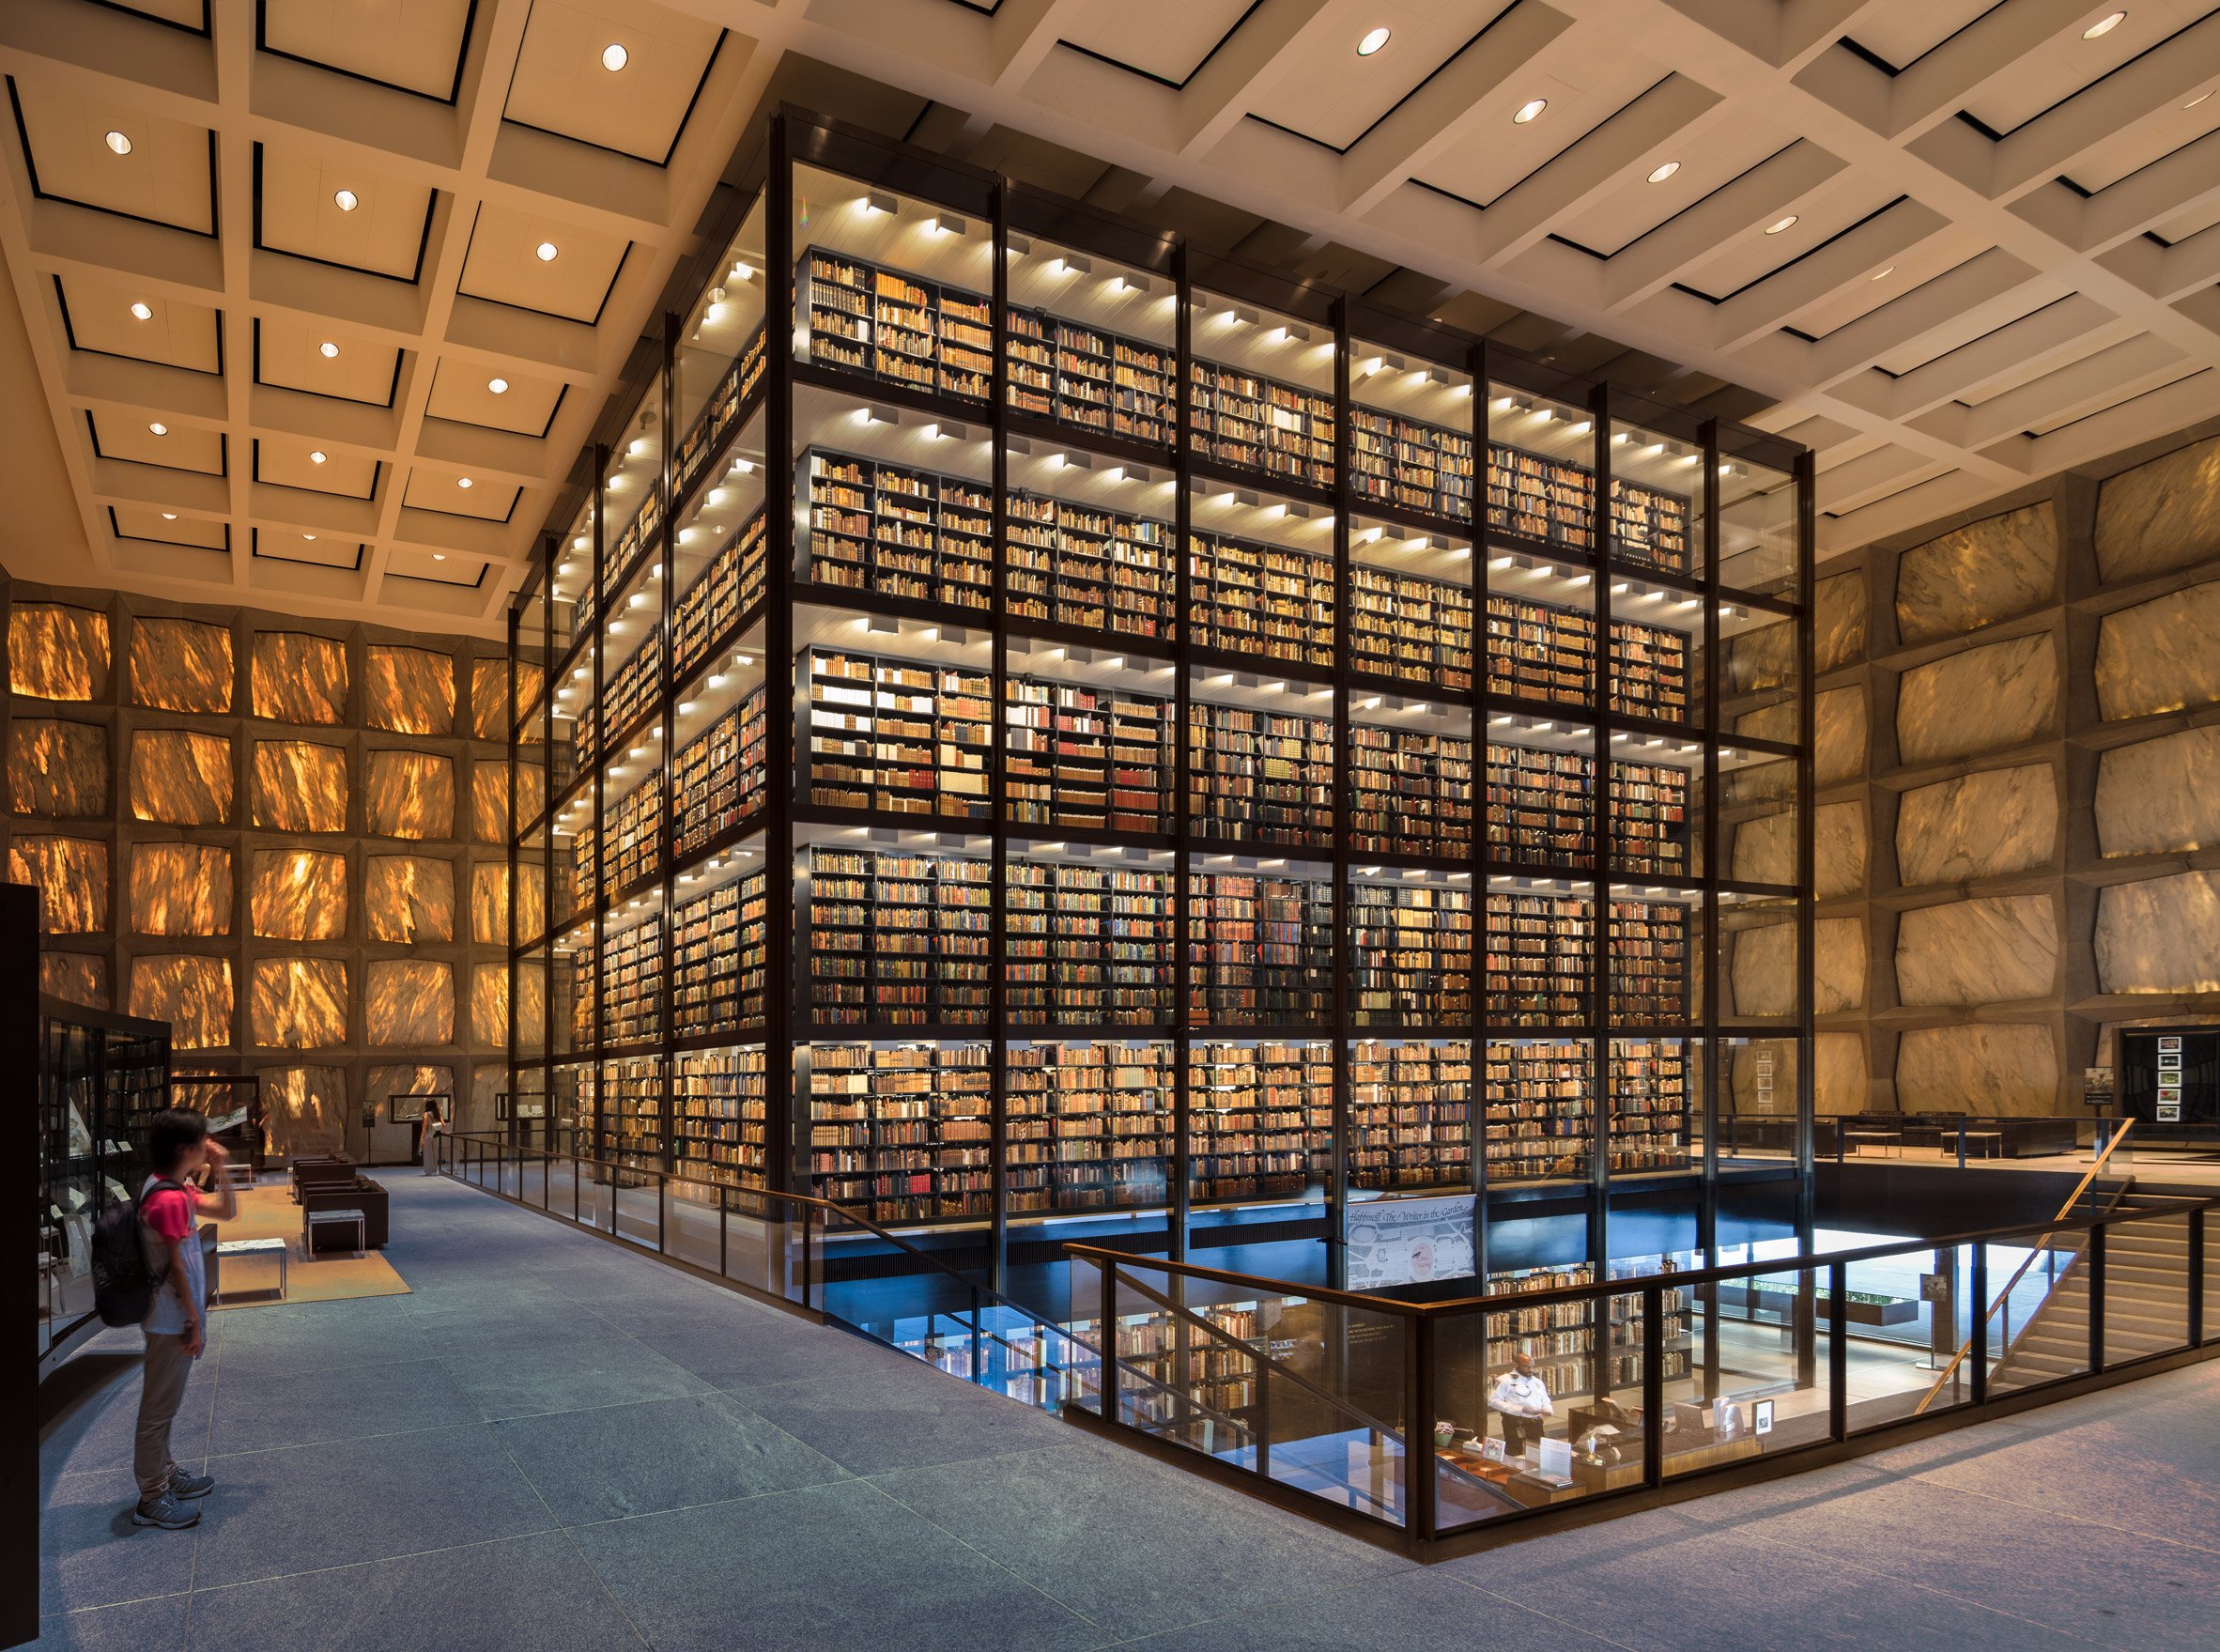 Beinecke Library by Gordon Bunshaft, New Haven, Connecticut